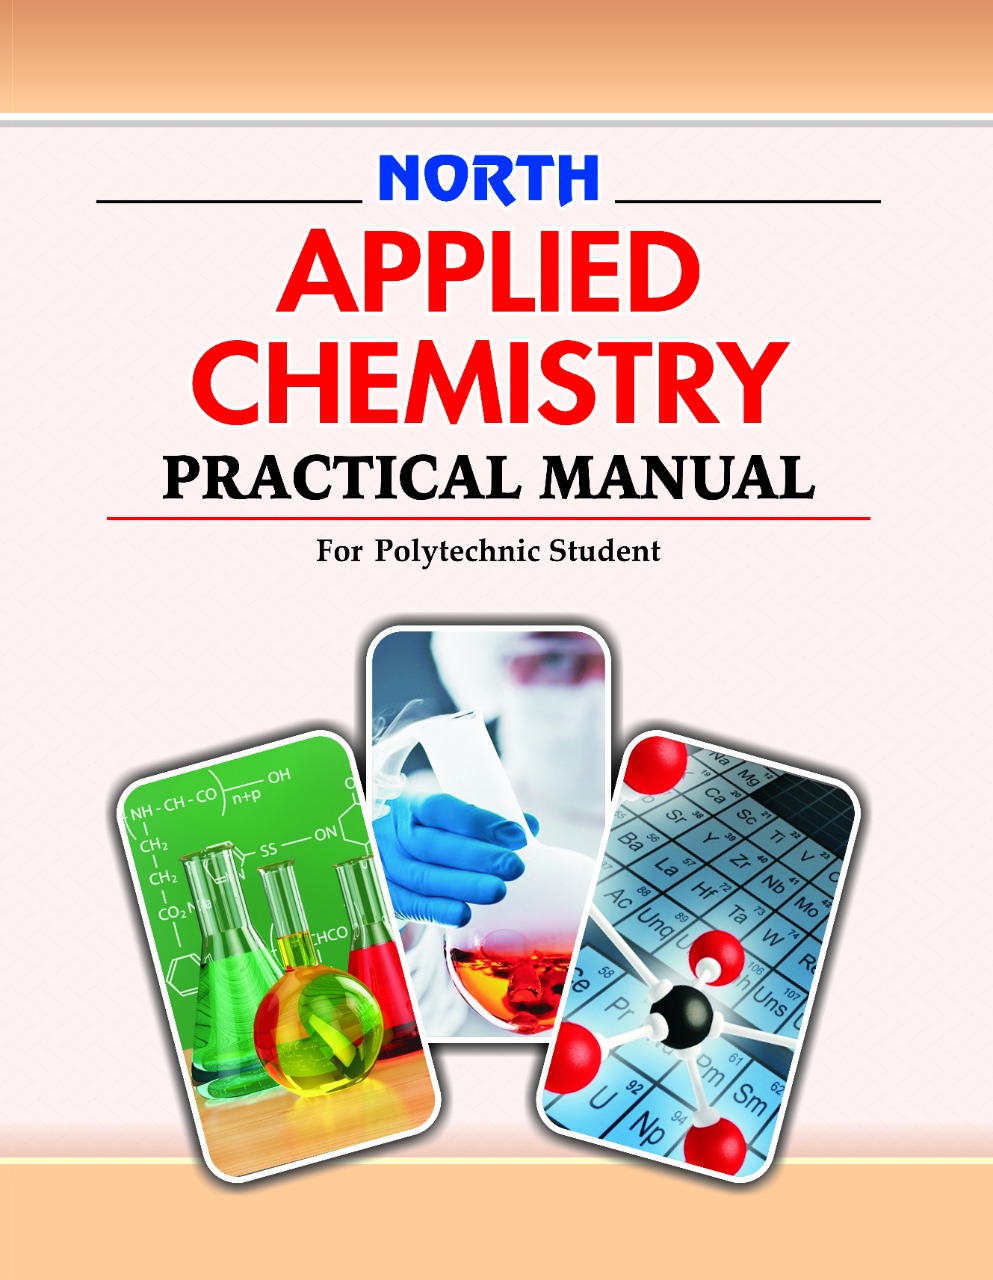 Applied Chemistry
Practical Manual